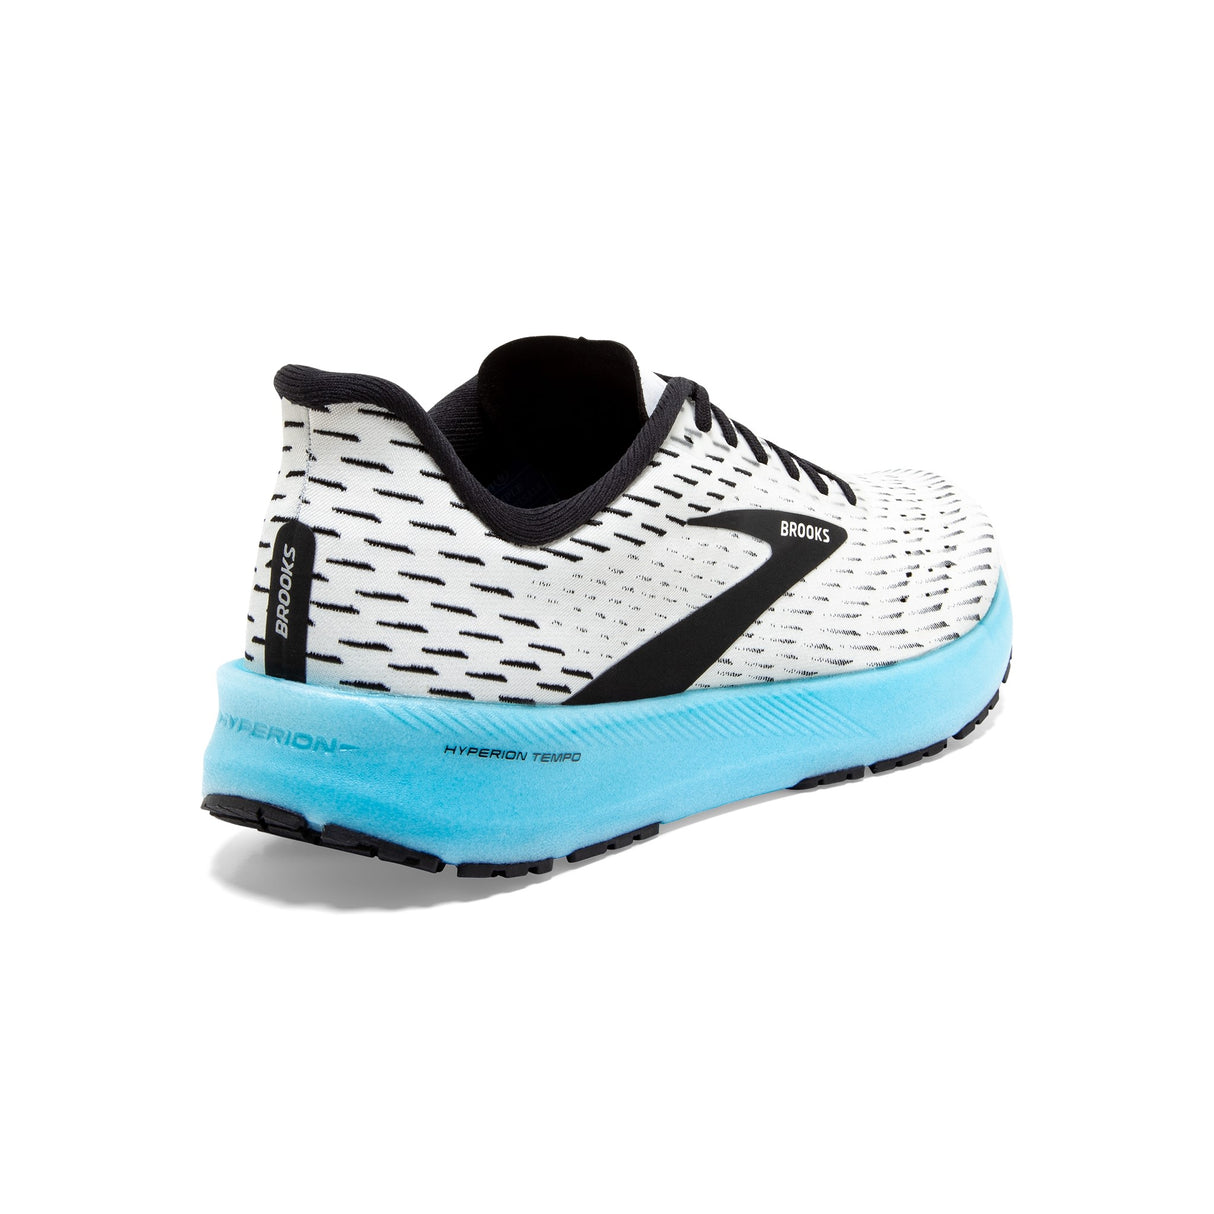 Brooks Hyperion Tempo chaussures de course a pied femme lateral